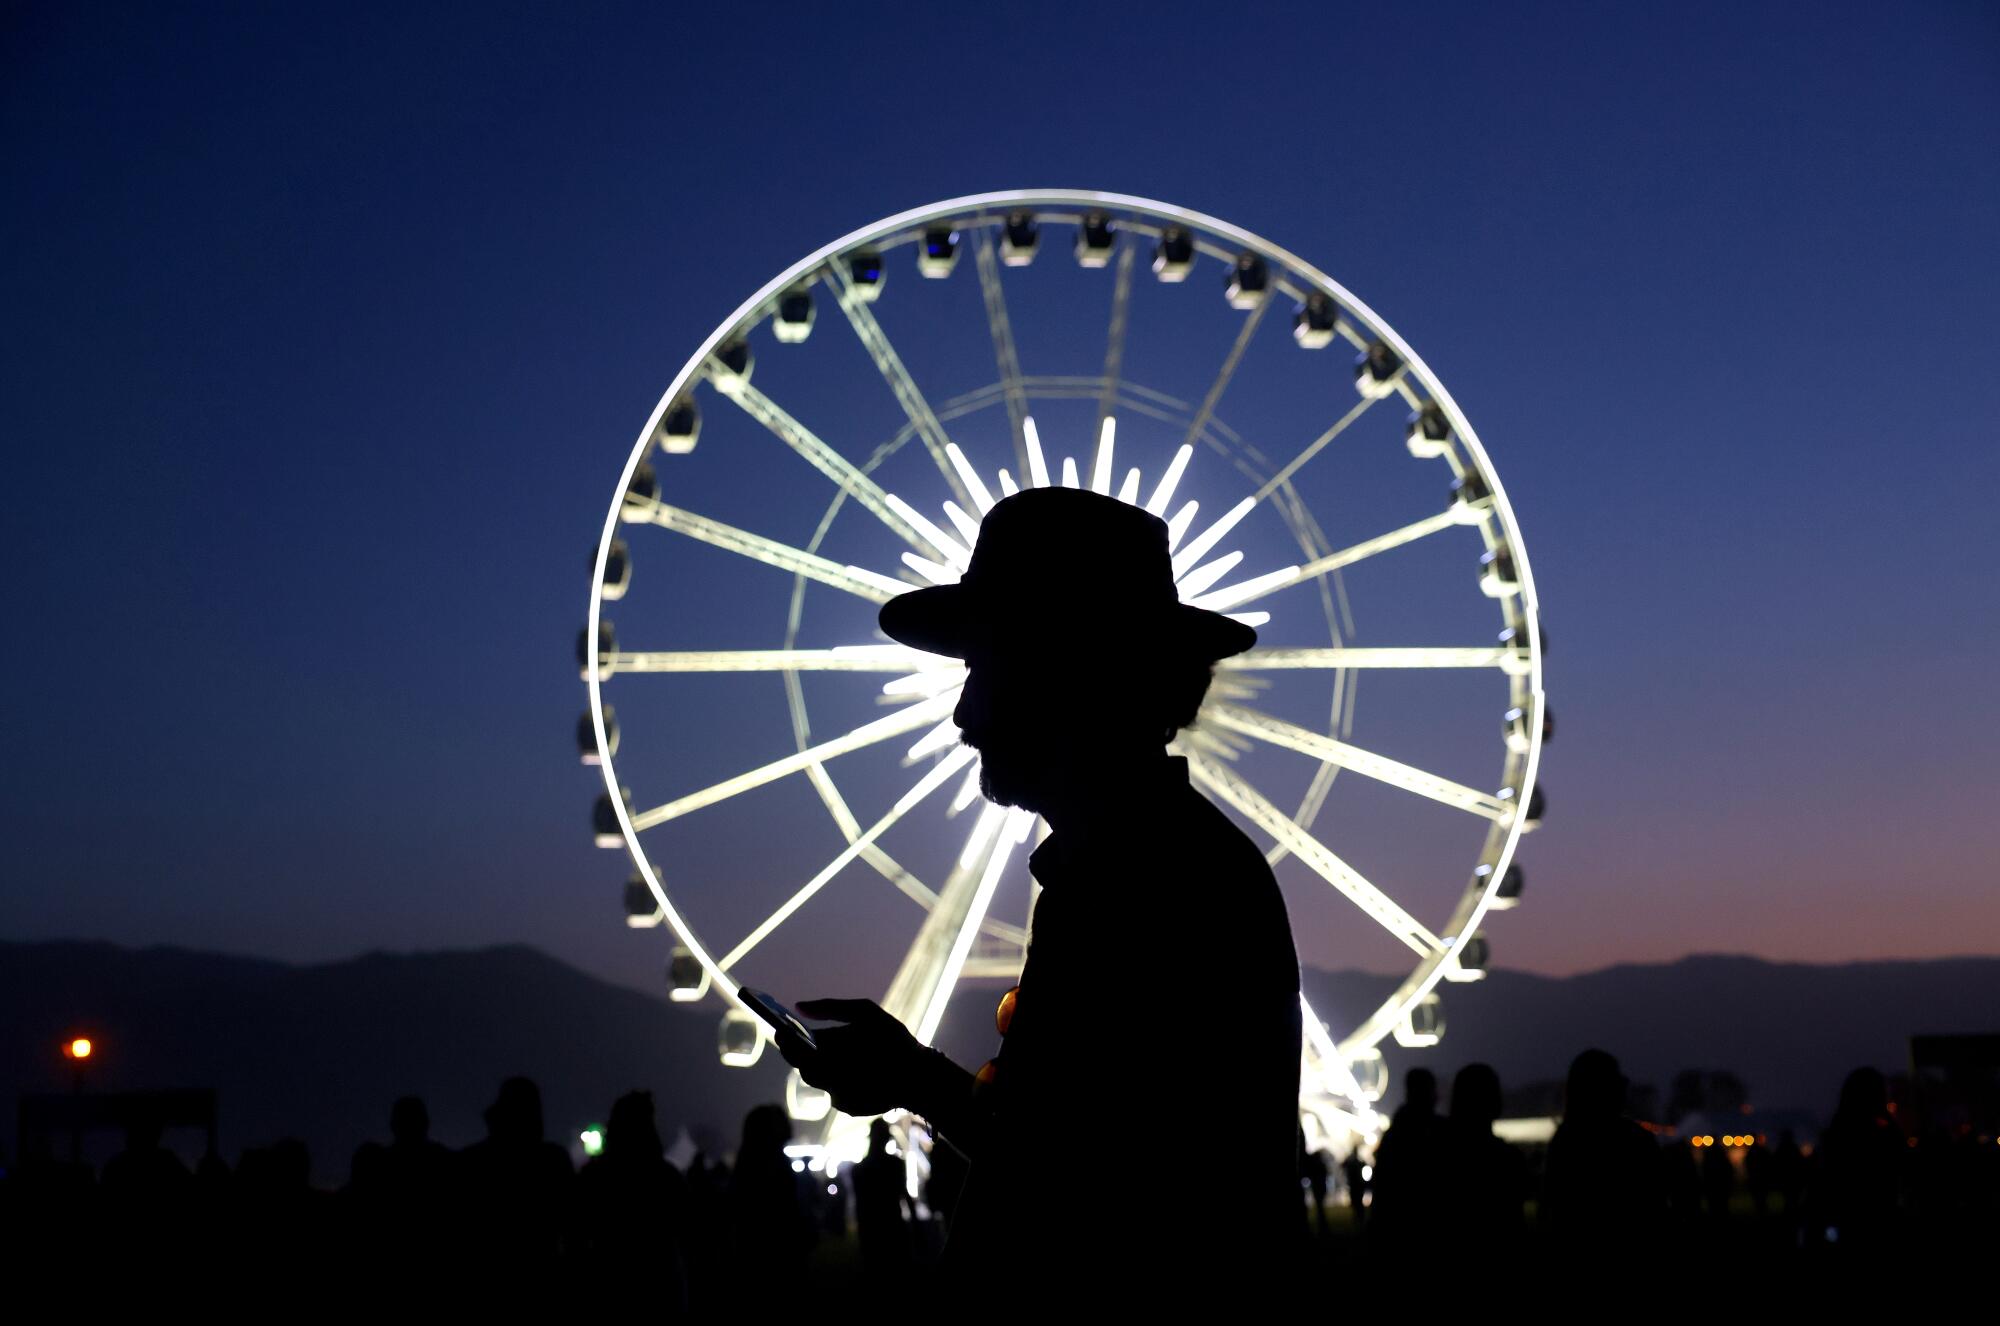  A music fan is silhouetted at dusk at Coachella.